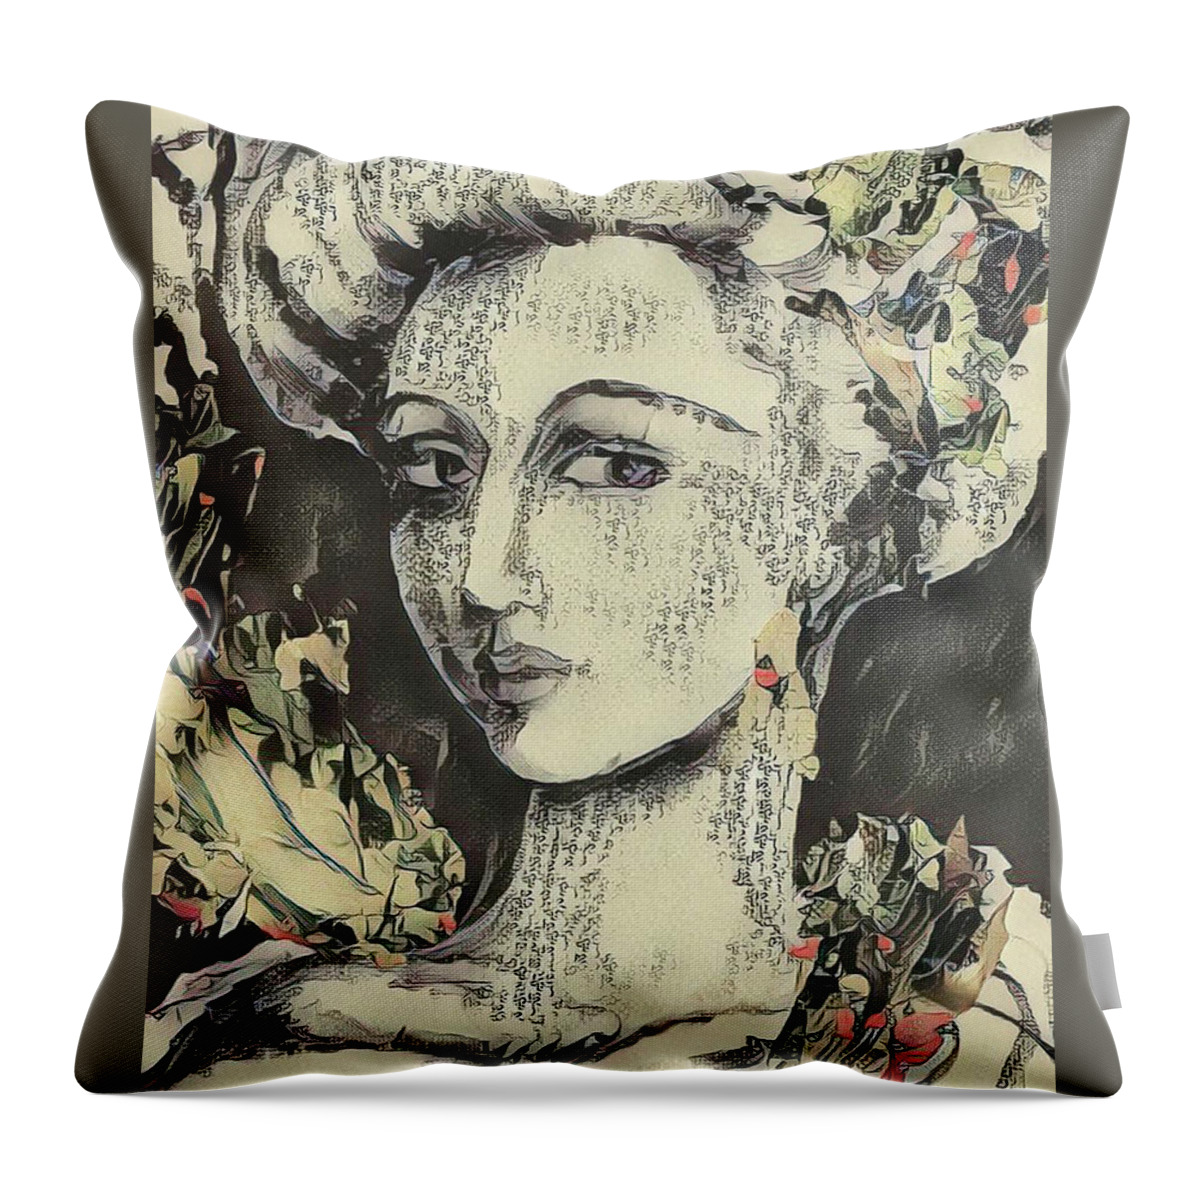 Digital Throw Pillow featuring the digital art Japanese-style Selfie by Rae Chichilnitsky